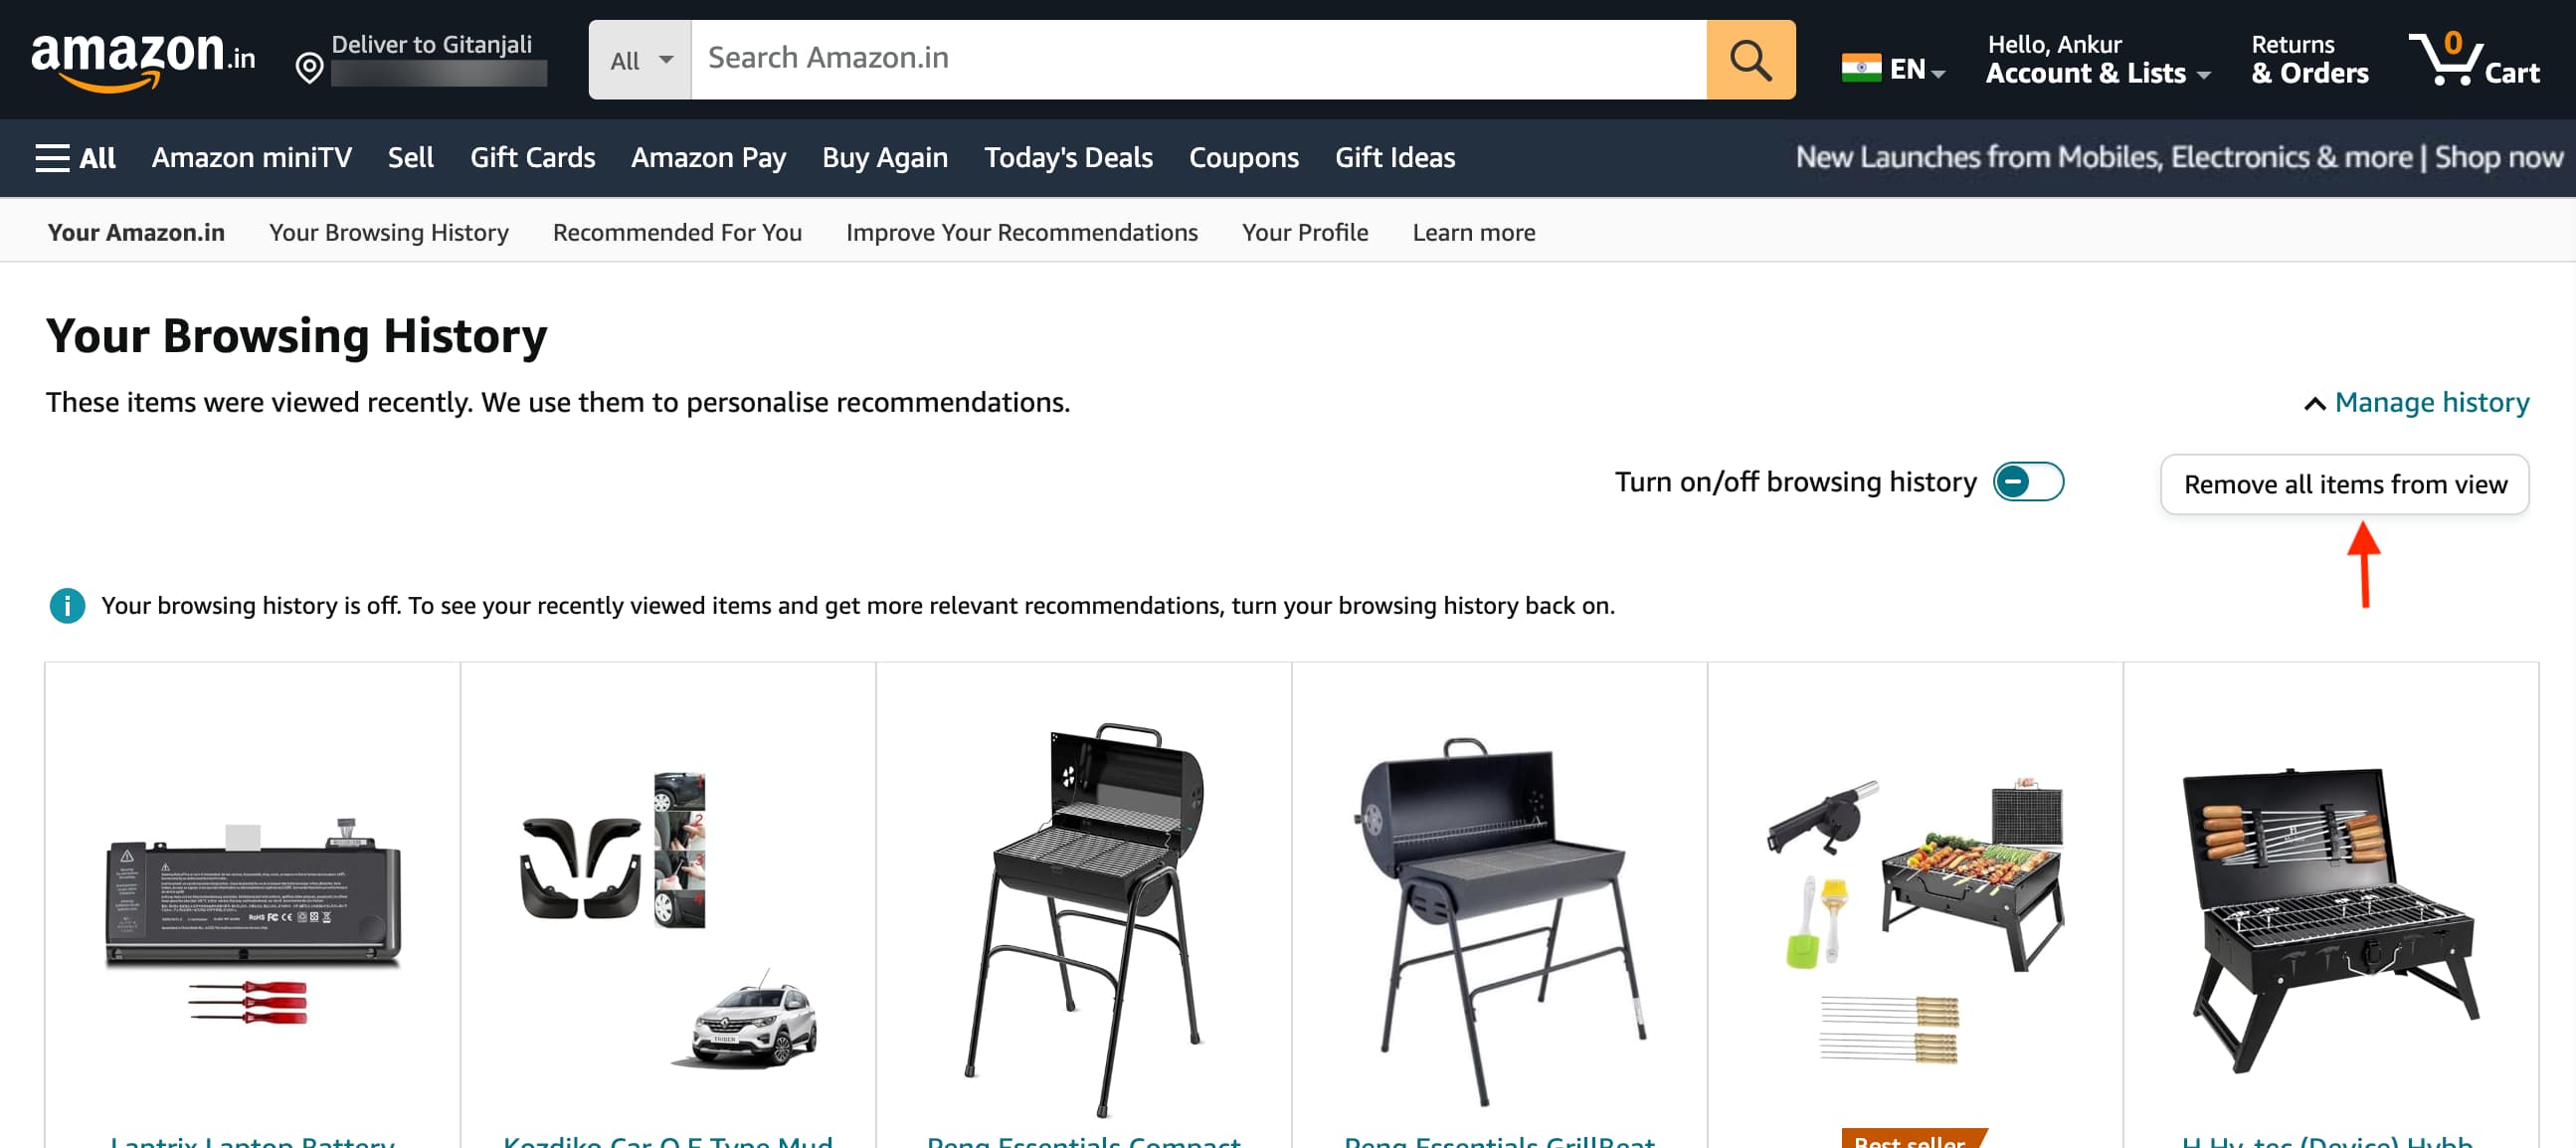 Remove all items from your Amazon browsing history using its website